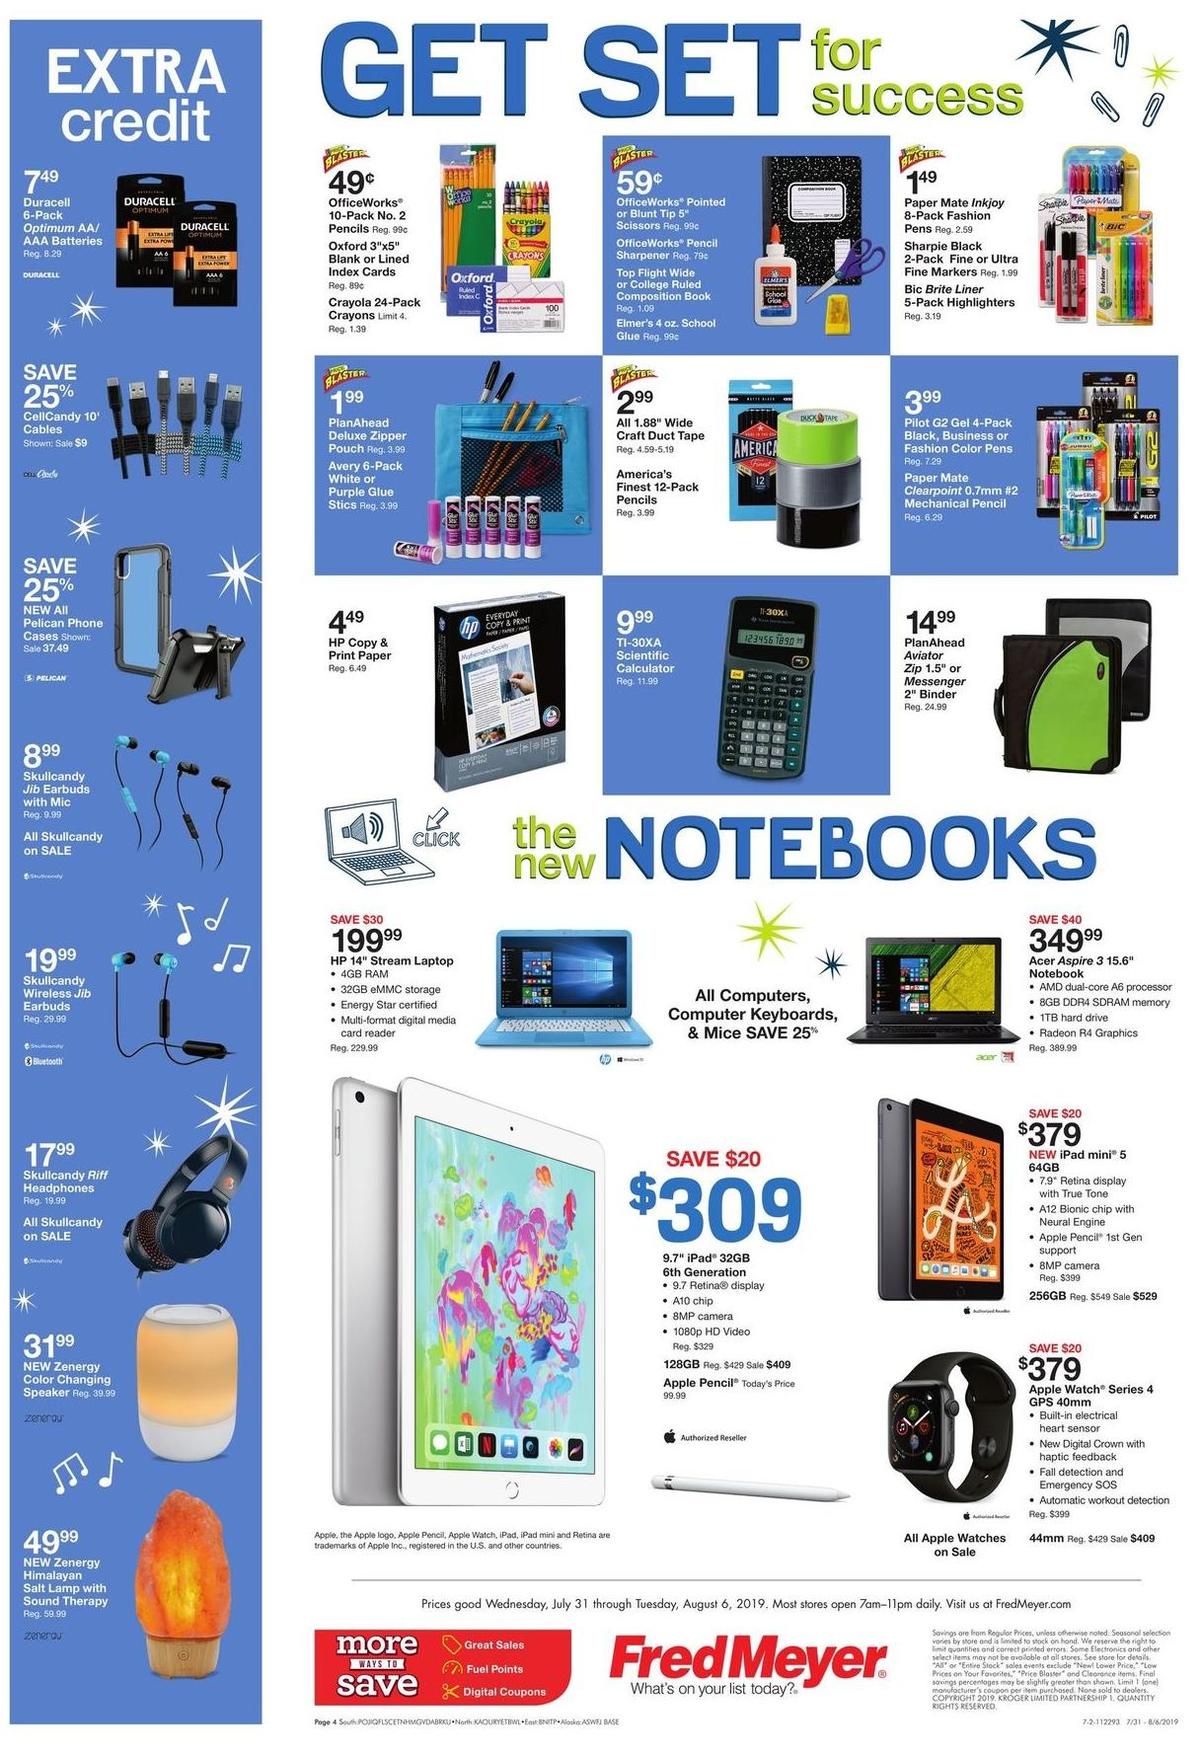 Fred Meyer Back to School Weekly Ad from July 31